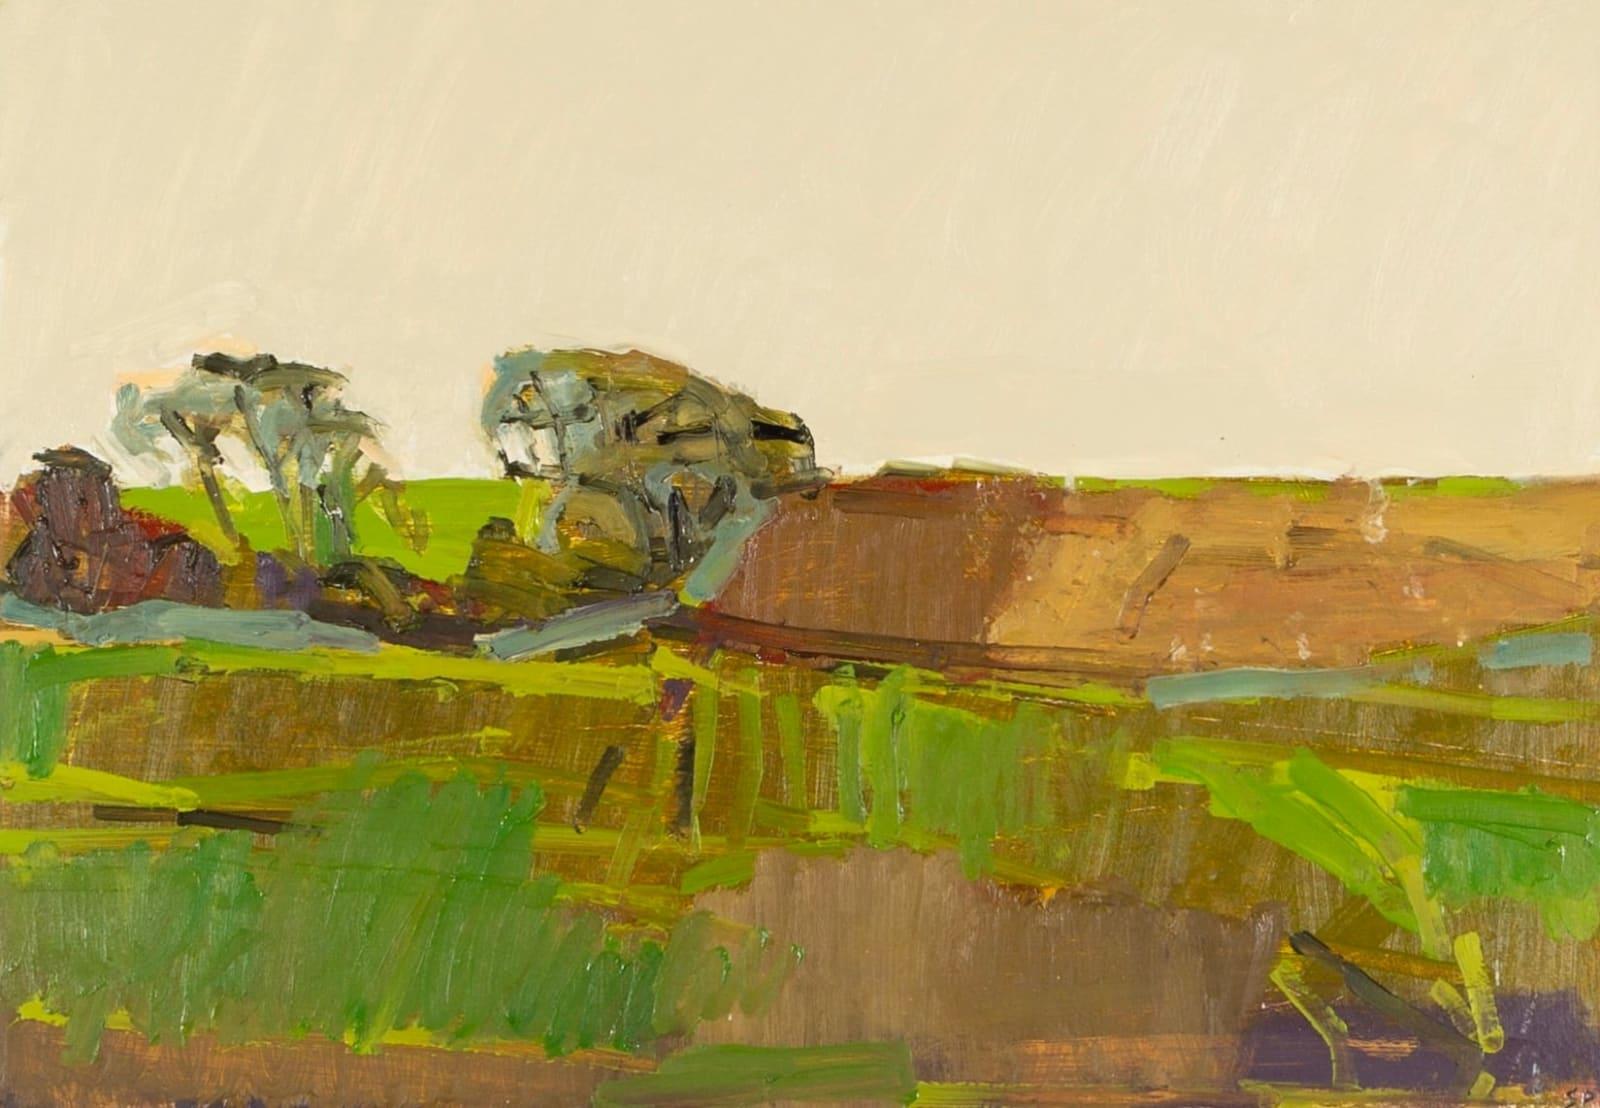 Near Pyecombe Painting by Stephen Palmer B. 1959, 2023

Additional information:
Medium: Oil on panel
Dimensions: 33 x 47 cm
13 x 18 1/2 in
Signed, dated and titled verso.

Stephen Palmer is a painter of landscape with a distinctive modern style. His